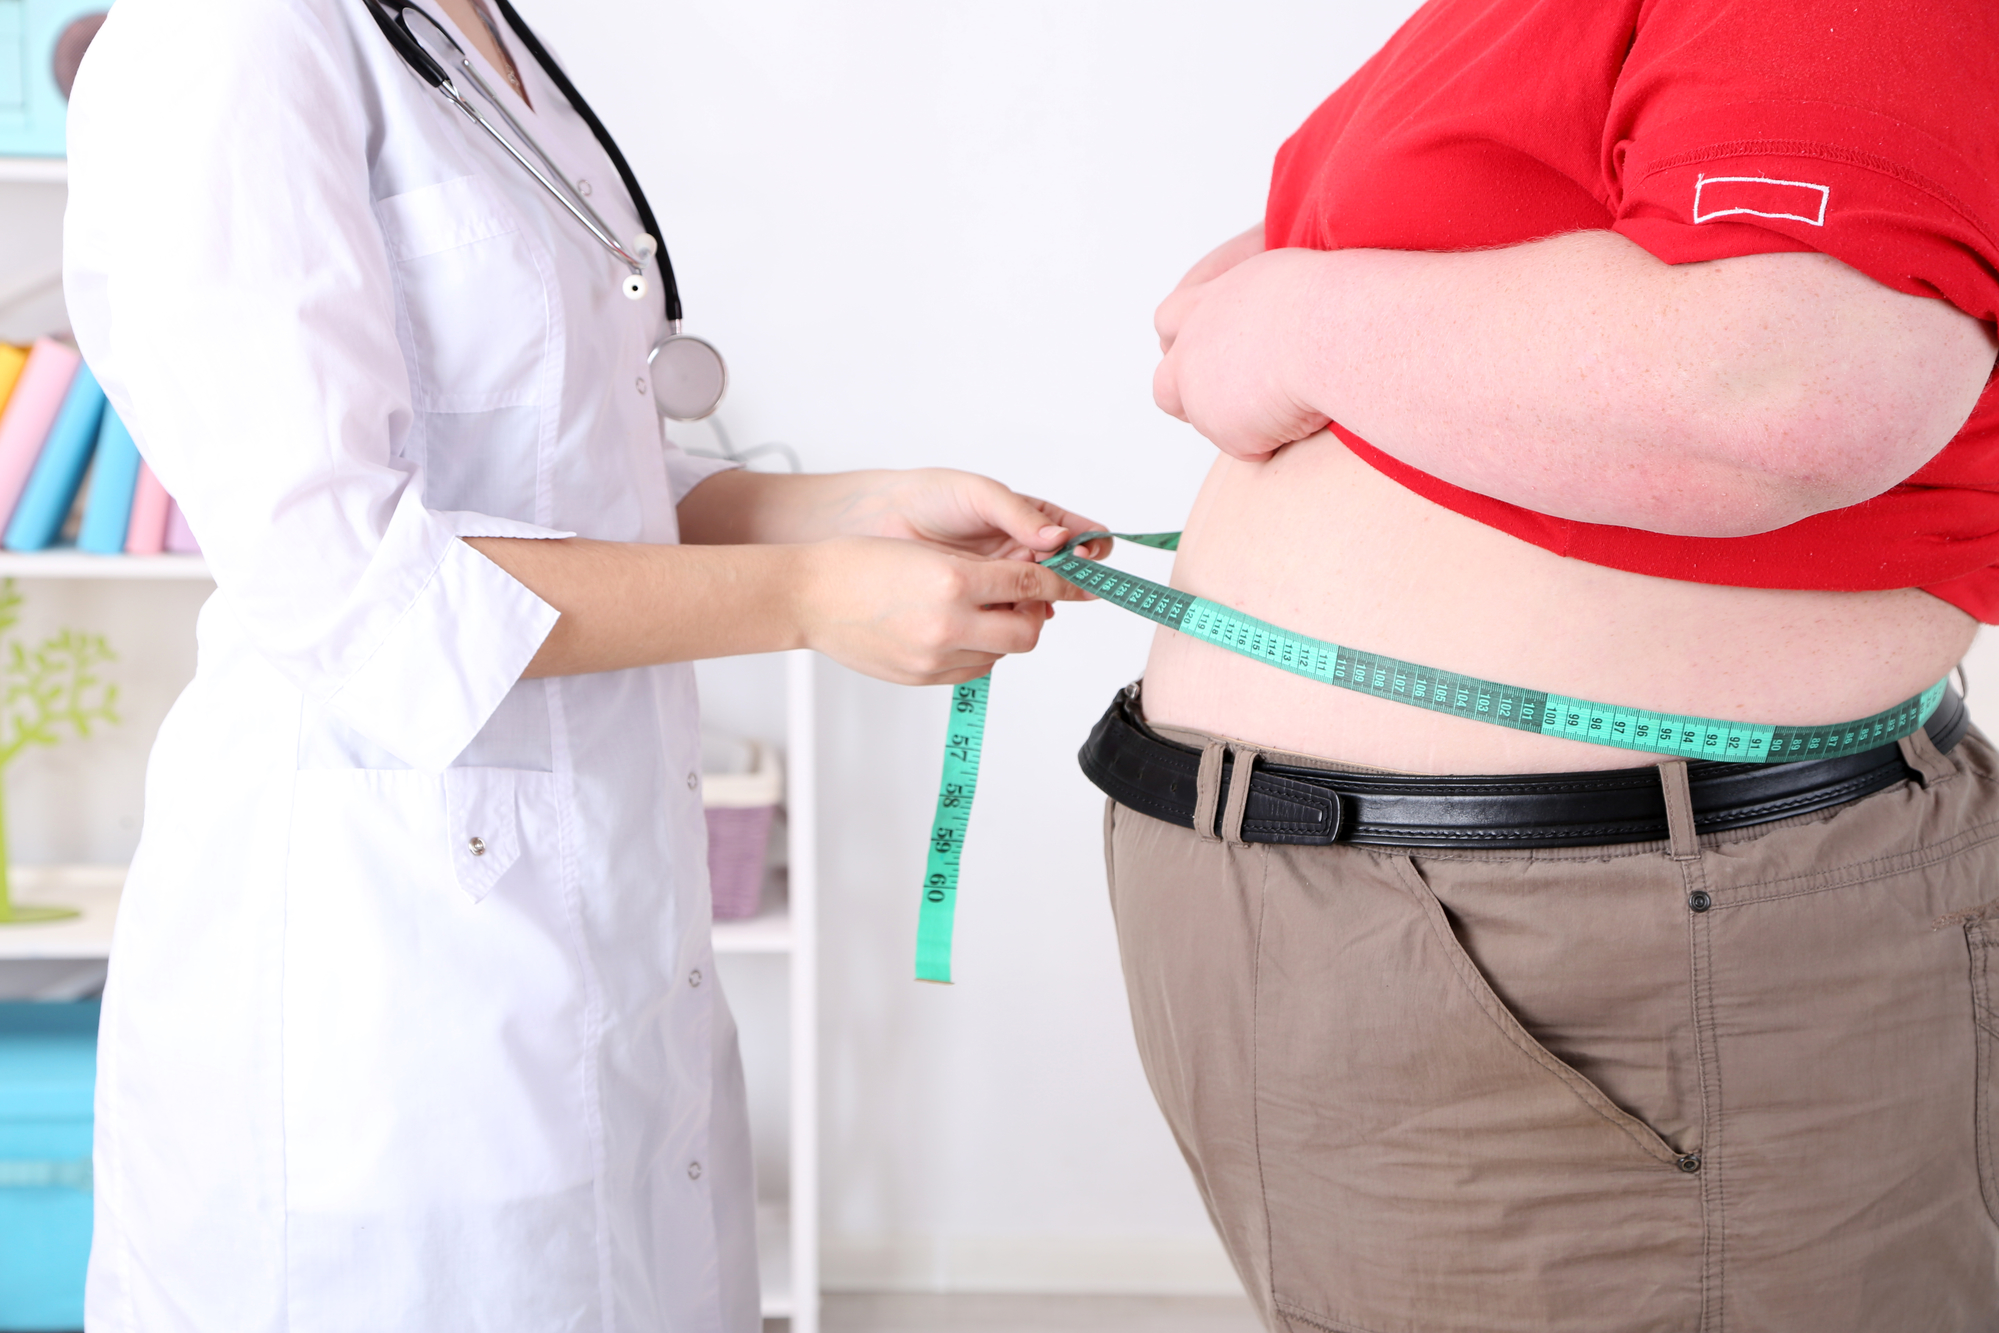 Is There a Connection Between Gut Health and the Rising Obesity Rates?